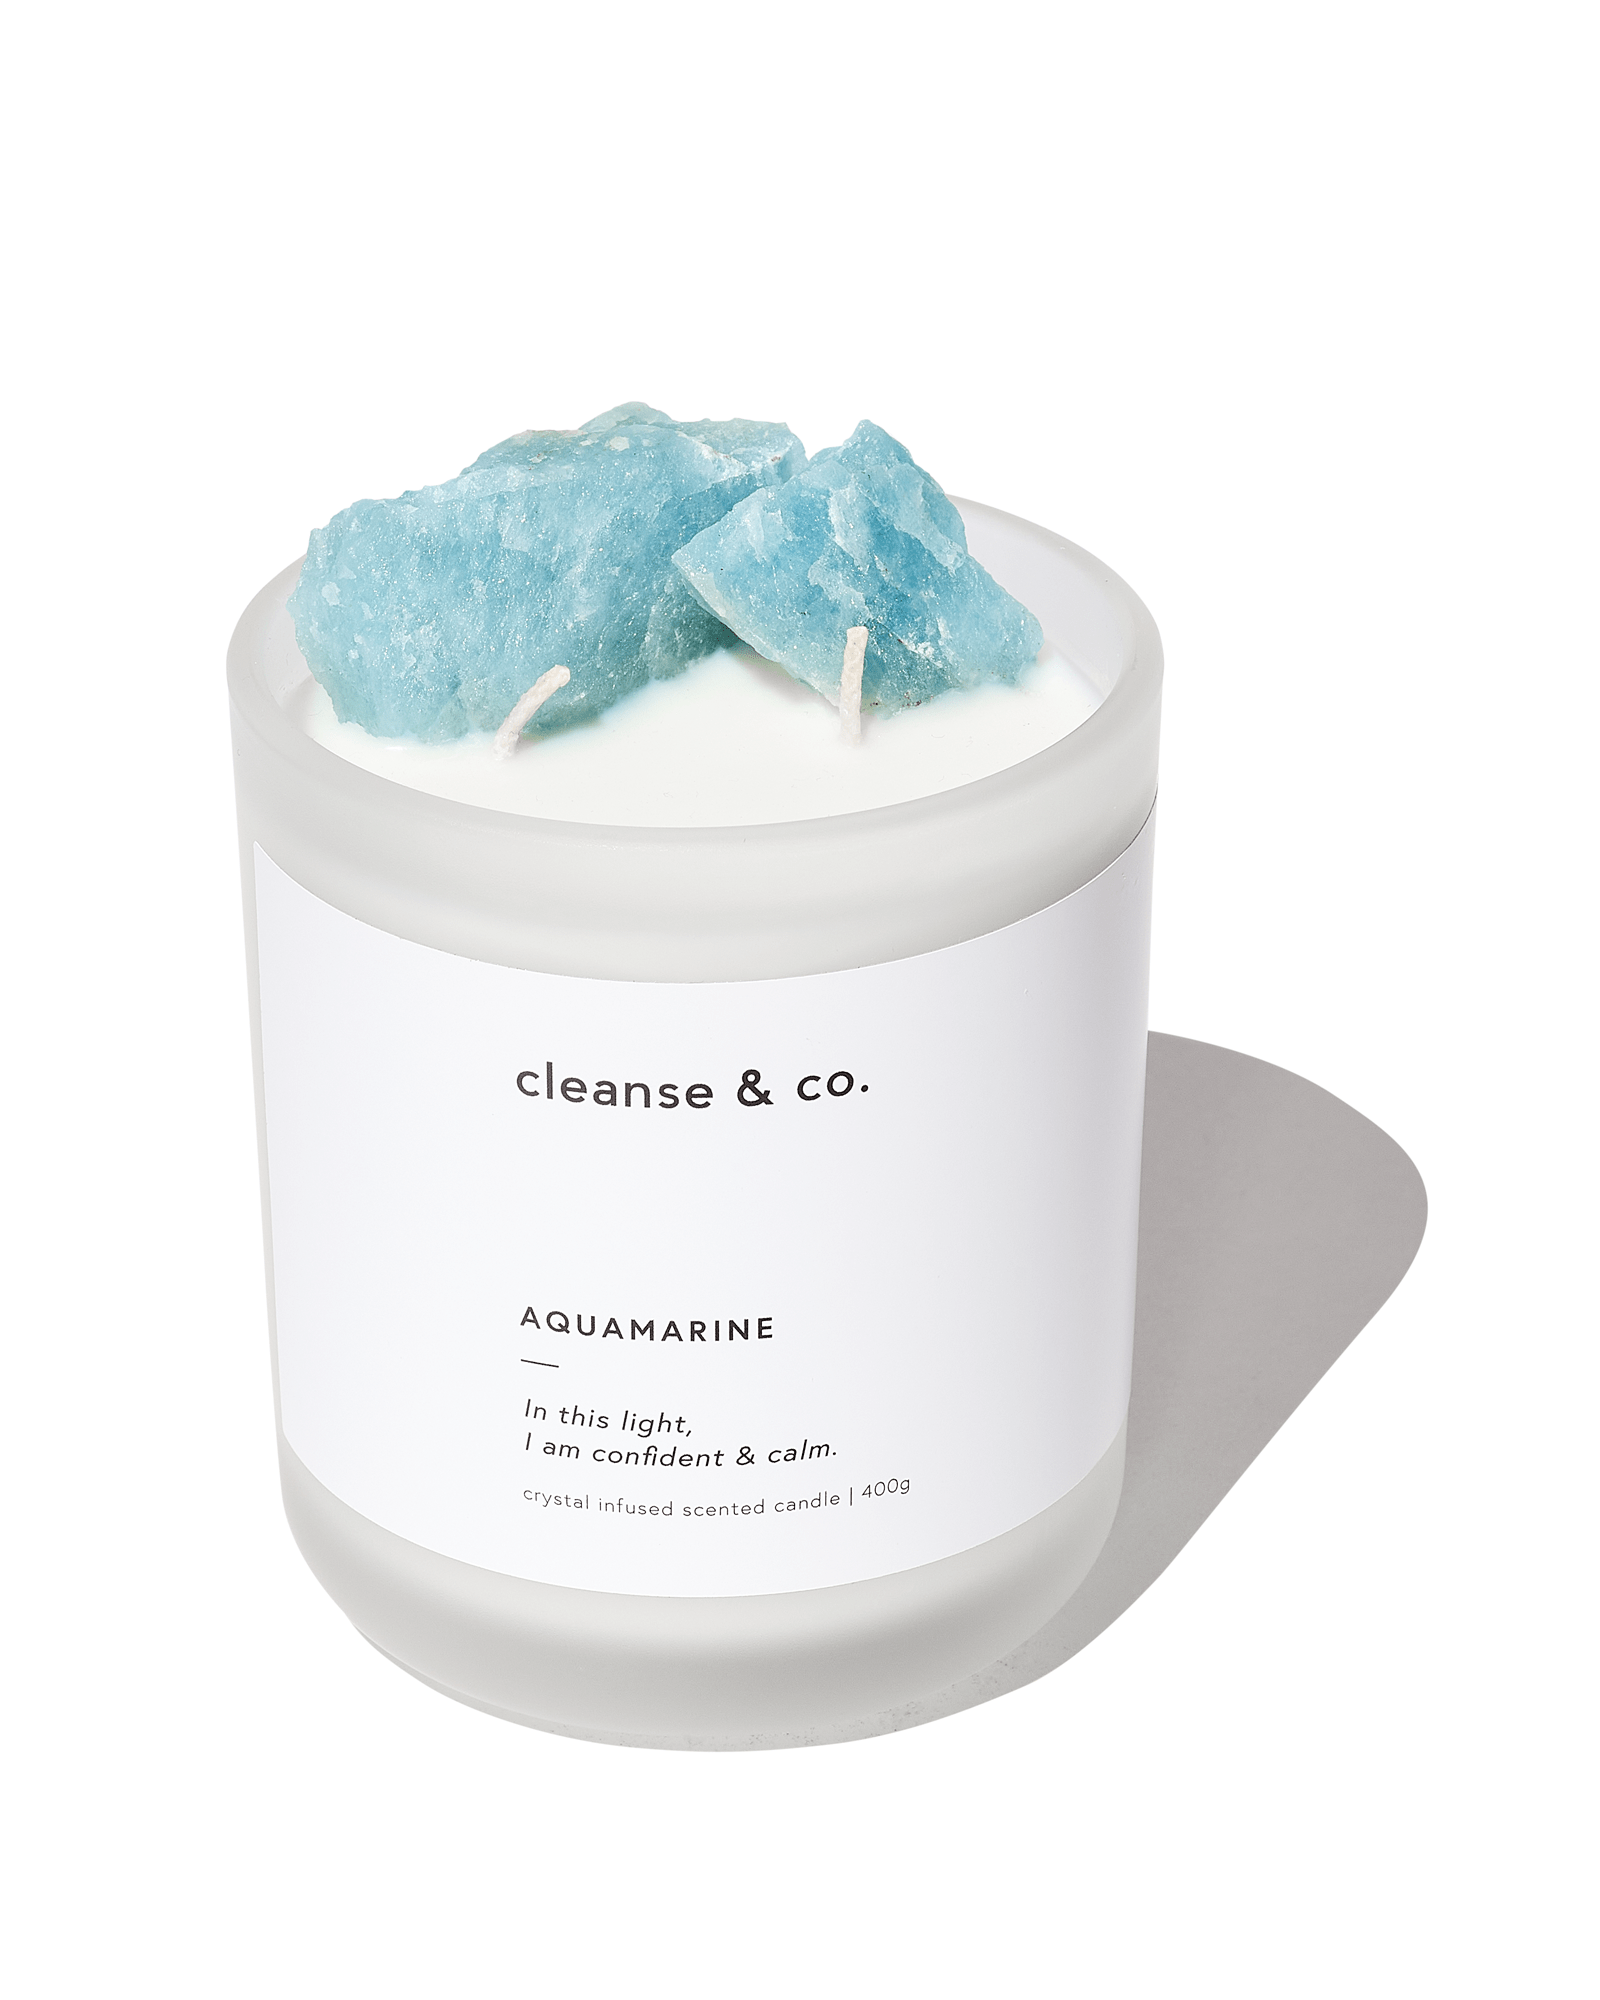 Aquamarine Intention Candle - confident & calm: 200G / Marine Moss & Melon by Cleanse & Co.